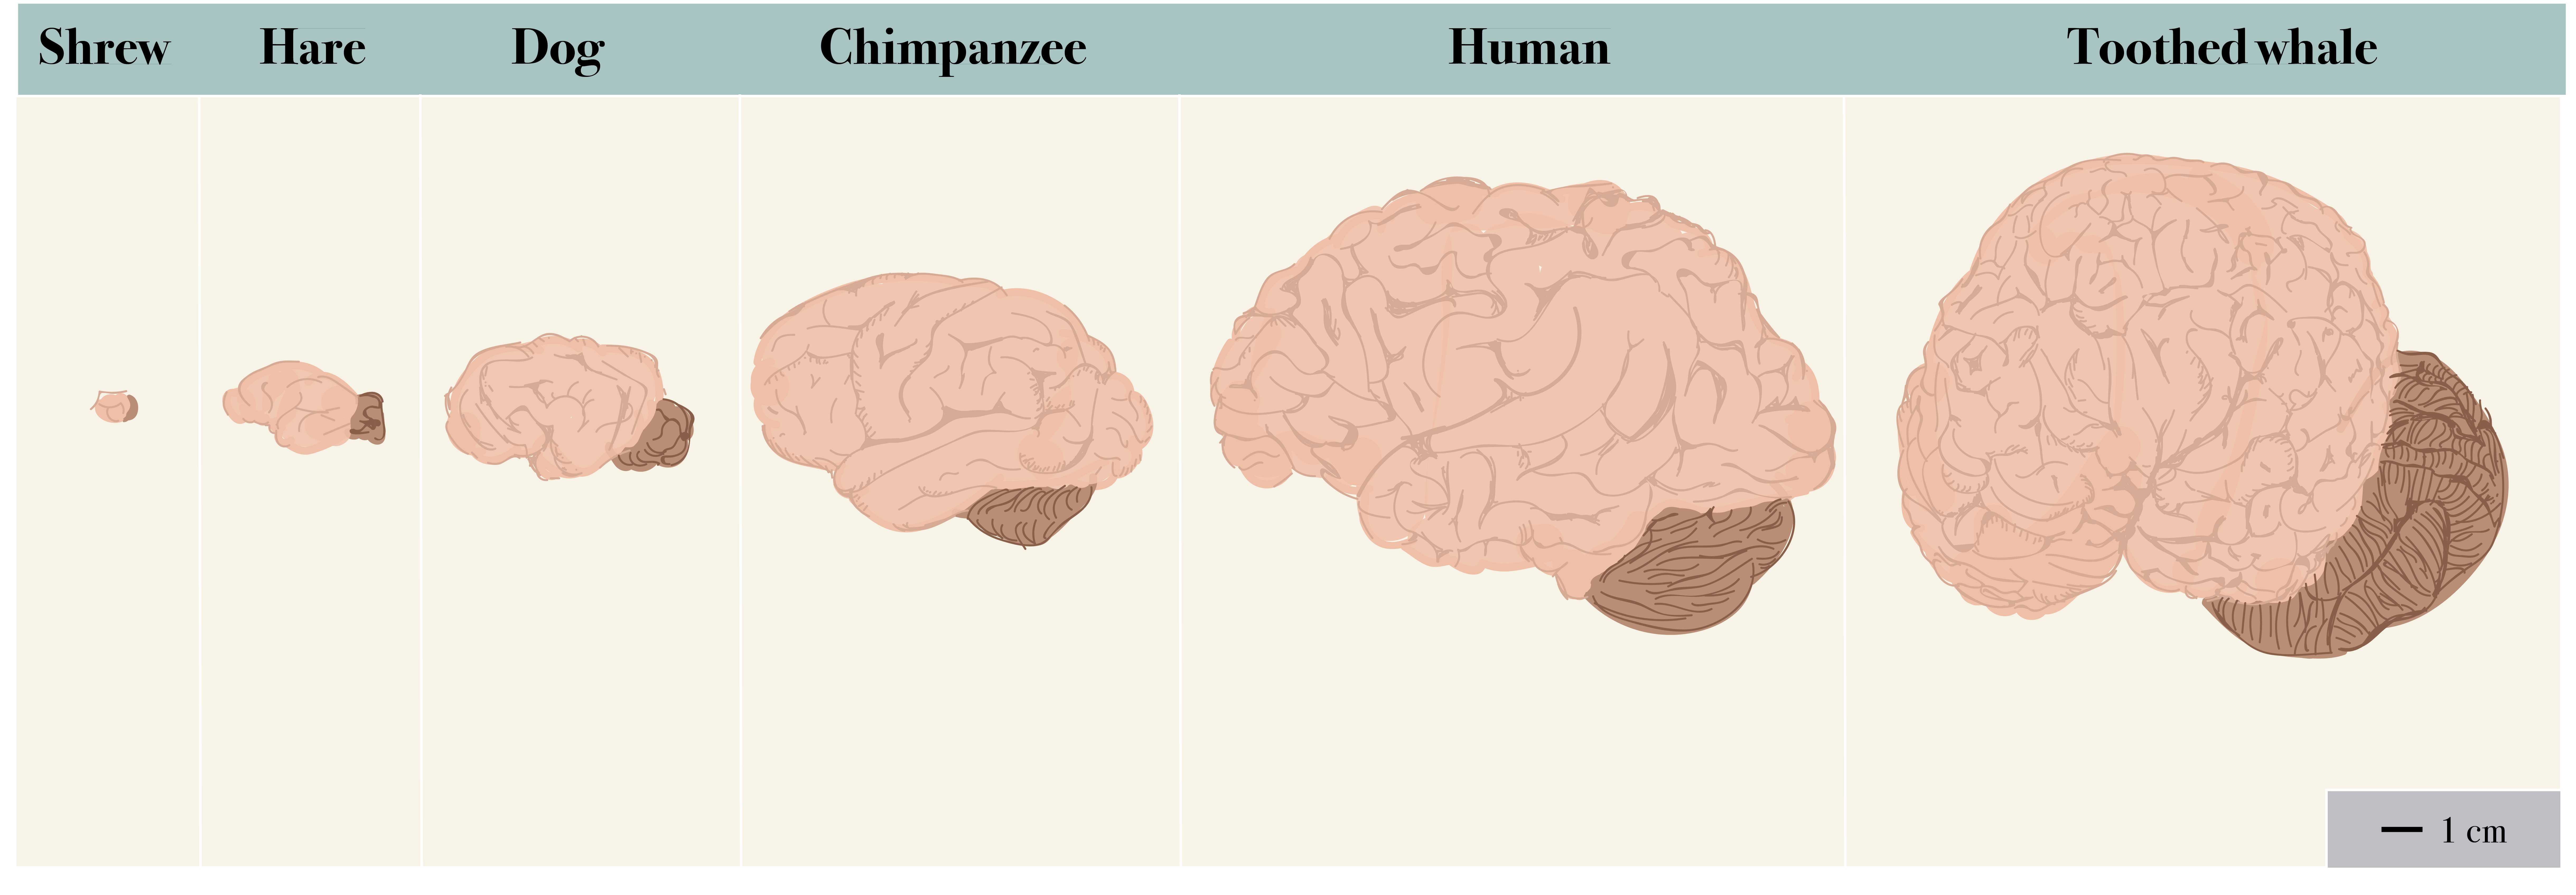 Graphic depicts mammalian brain size from small, shrew, to large, toothed whale.